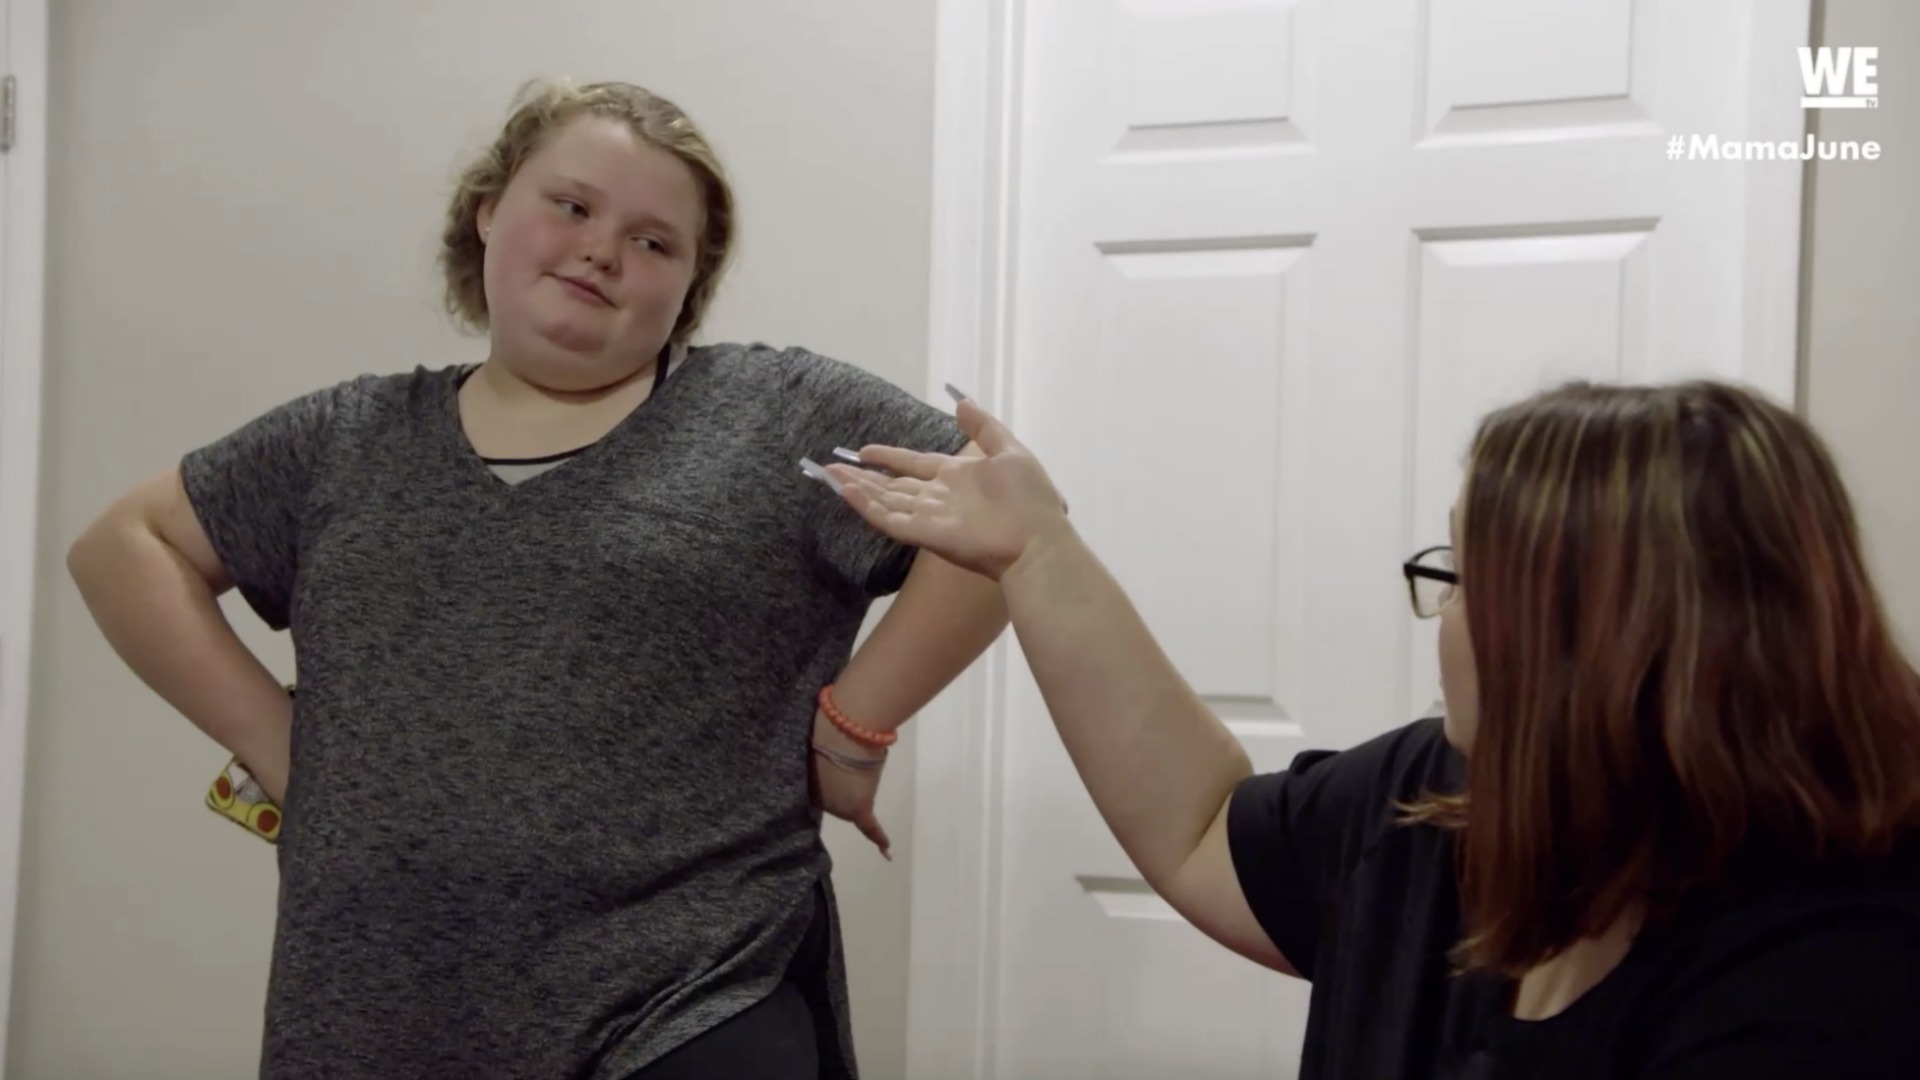 Watch #FamilyHealing Tip No. 85: Lean on Your Real Friends! | Mama June: From Not to Hot Video Extras